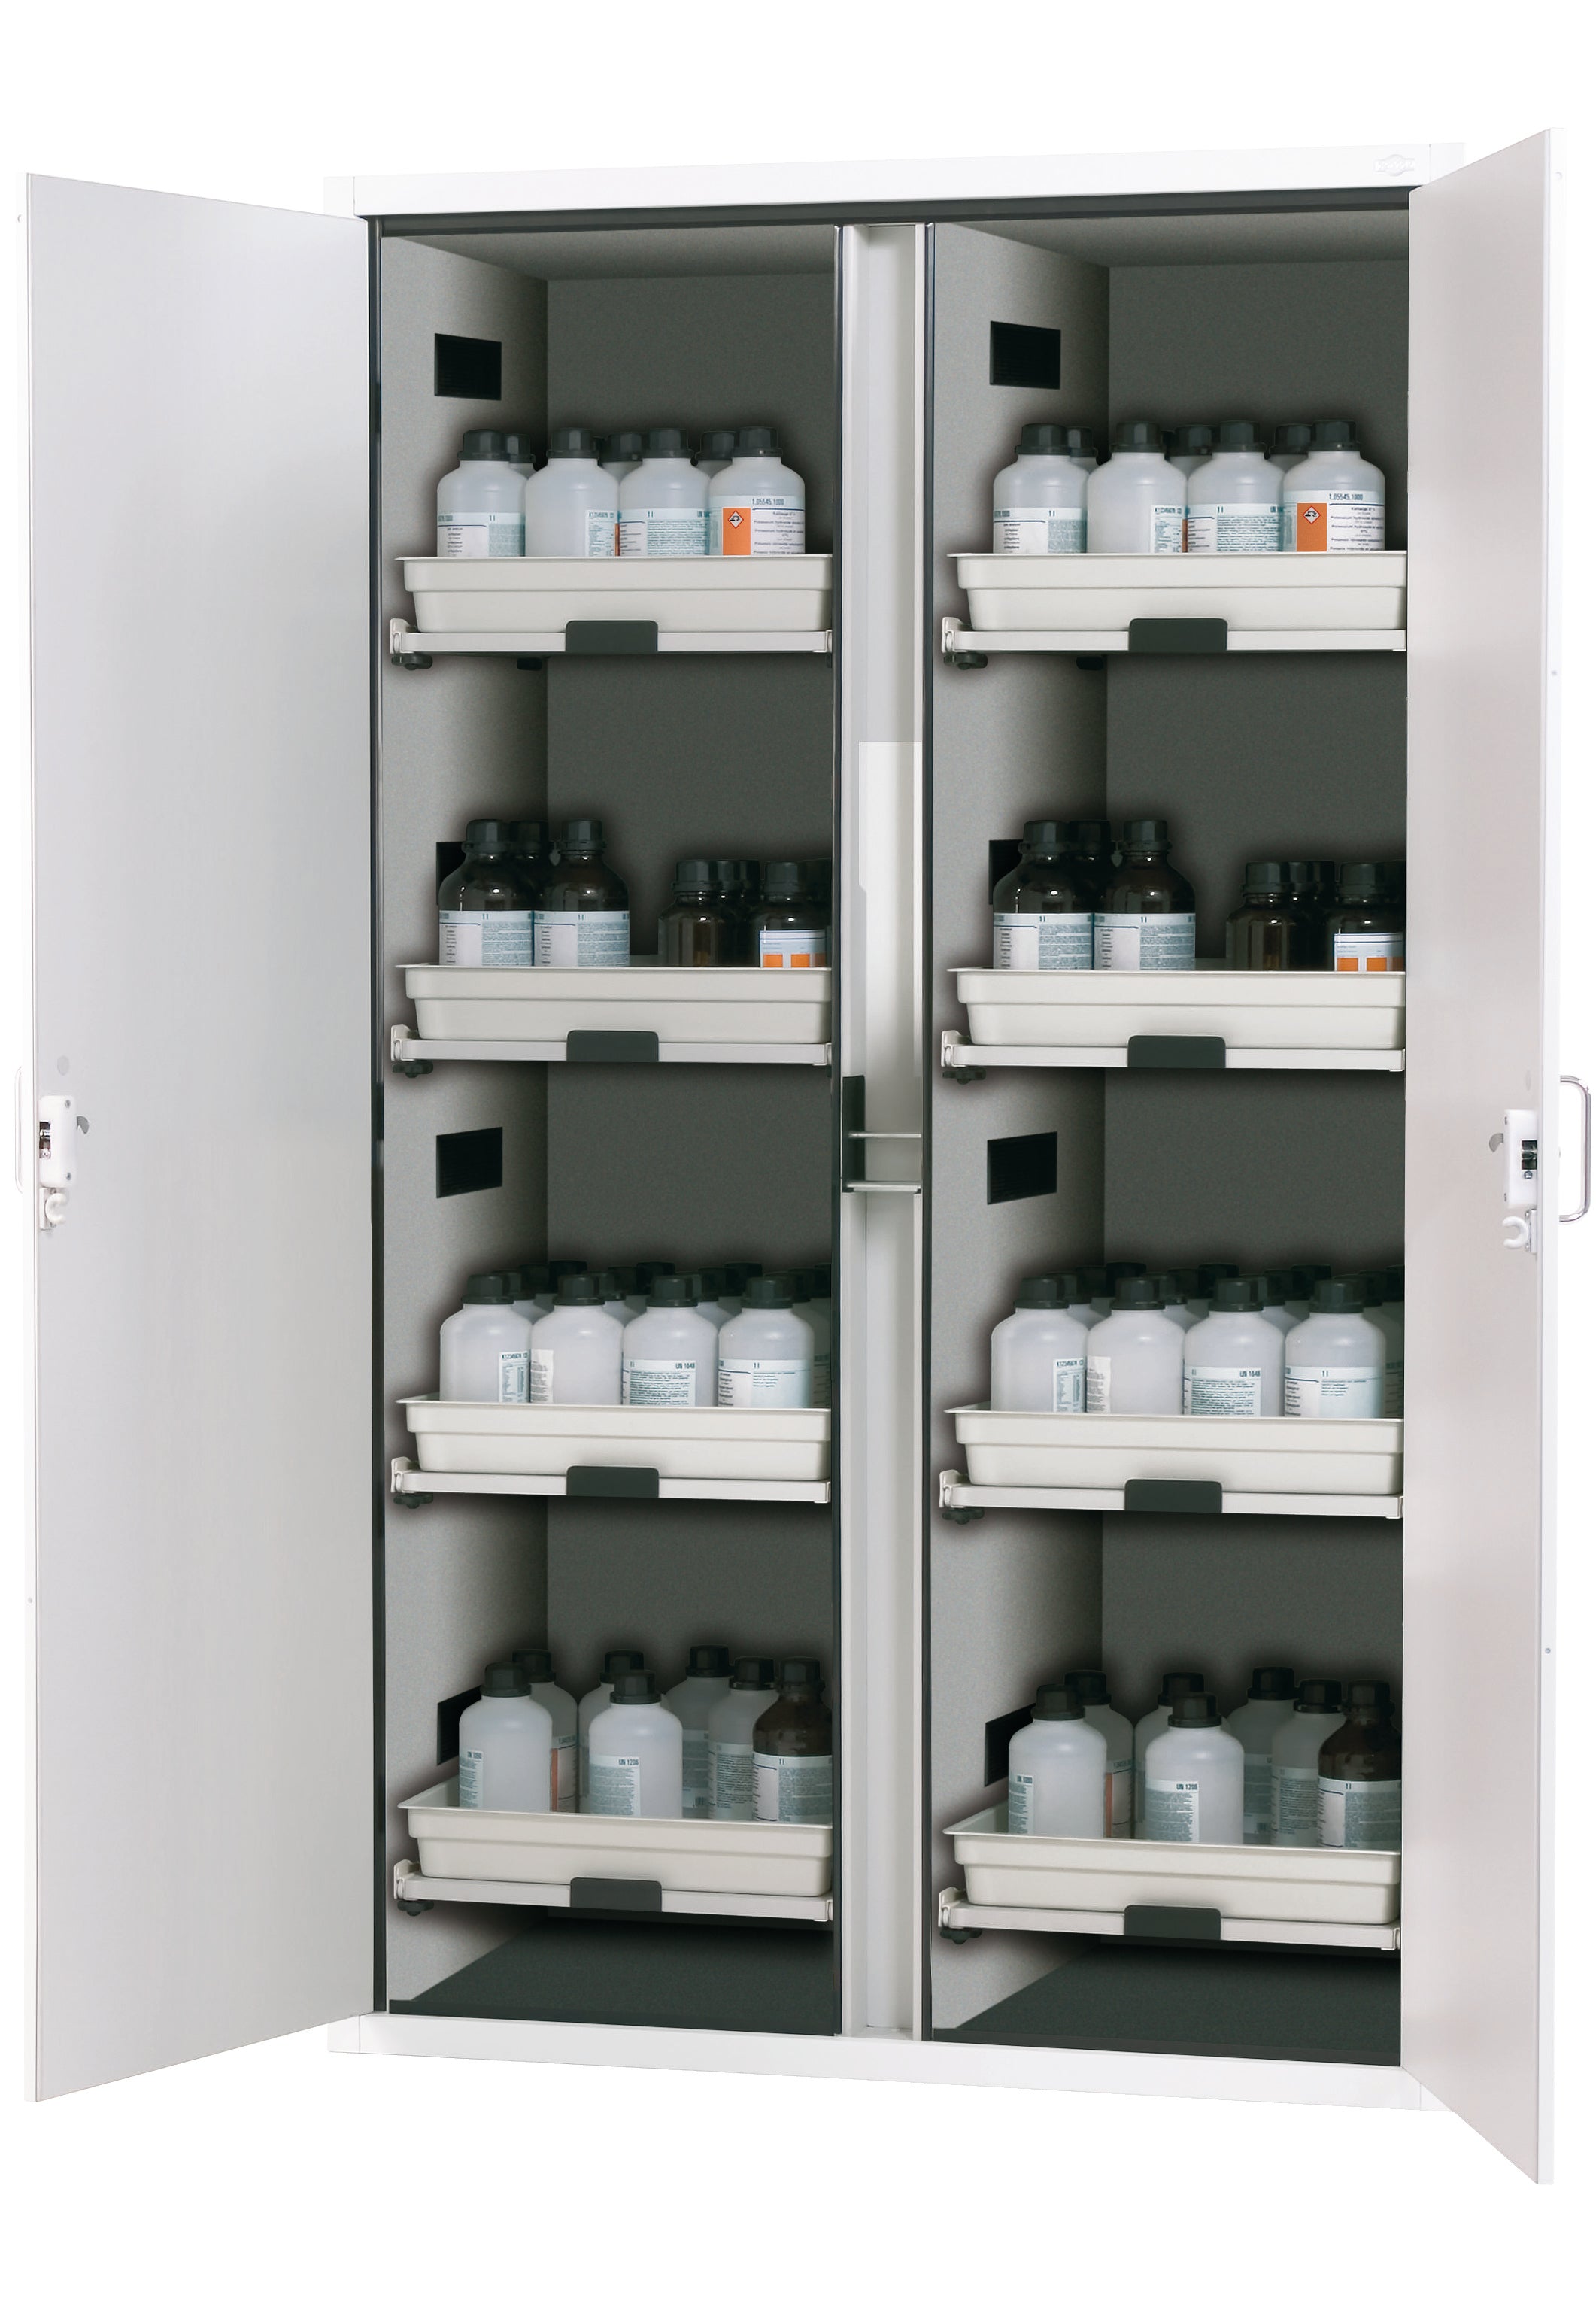 Acid and alkaline cabinet SL-CLASSIC model SL.196.120.MV in laboratory white (similar to RAL 9016) with 8x AbZ pull-out shelves (FP plate/polypropylene)